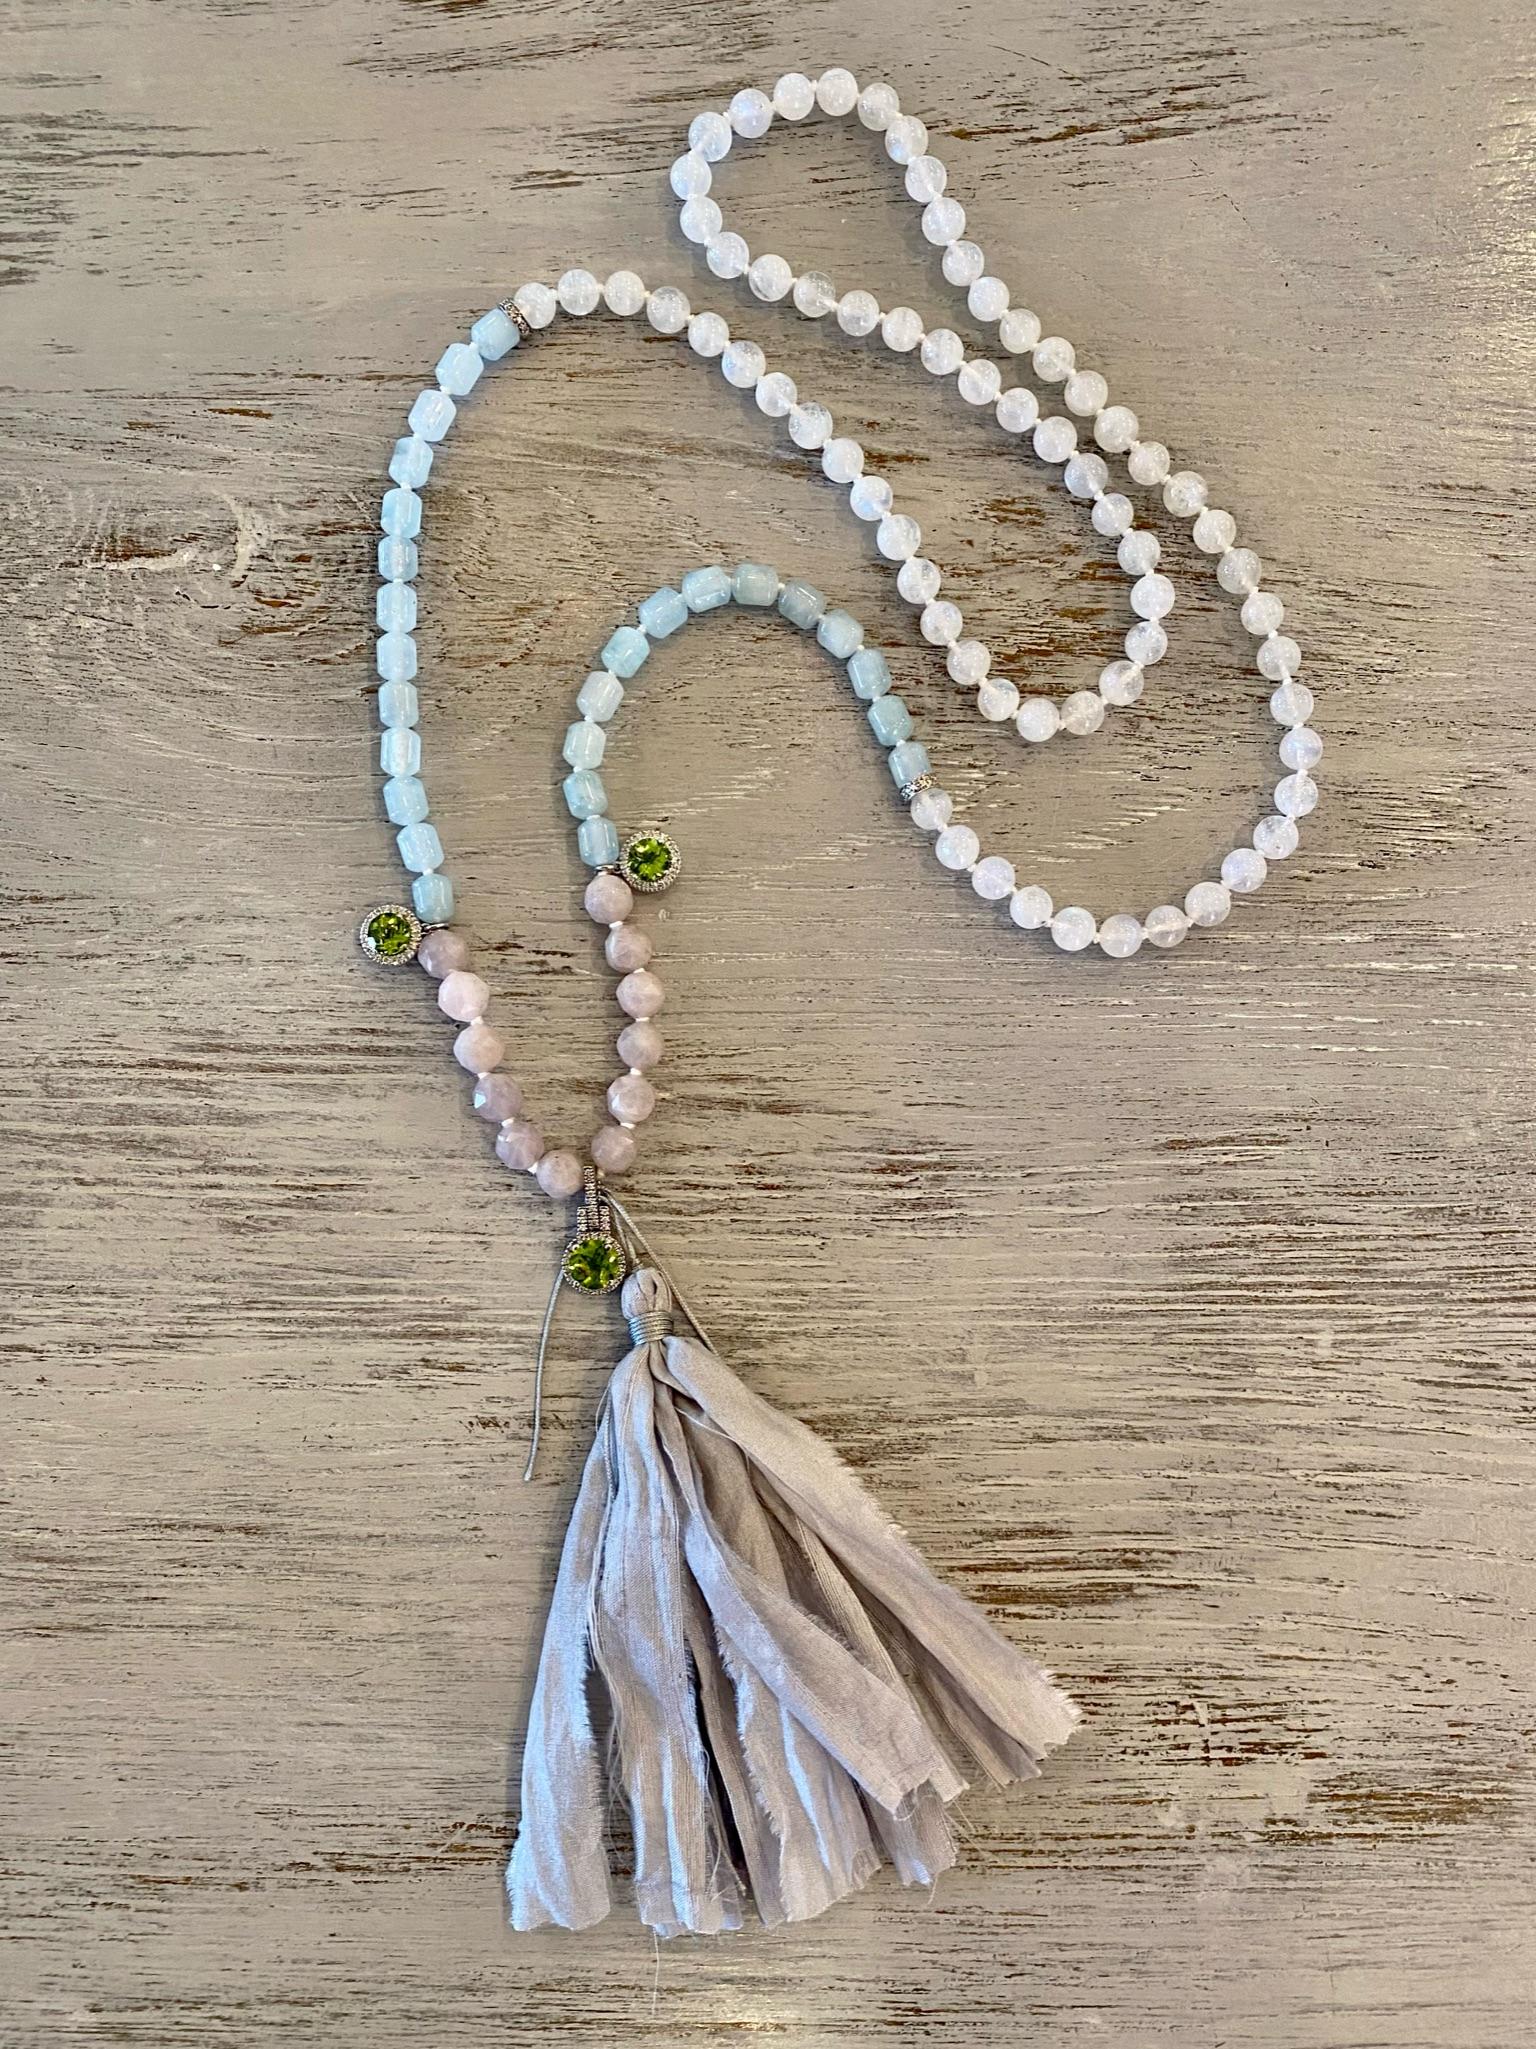 The only place you will find Fine Jewelry Mala Necklaces, used for prayer and meditation practices.  Some people even call them Yoga Necklaces to connote a lifestyle of intentional living.  Kiersten Elizabeth uses all gemstone materials and